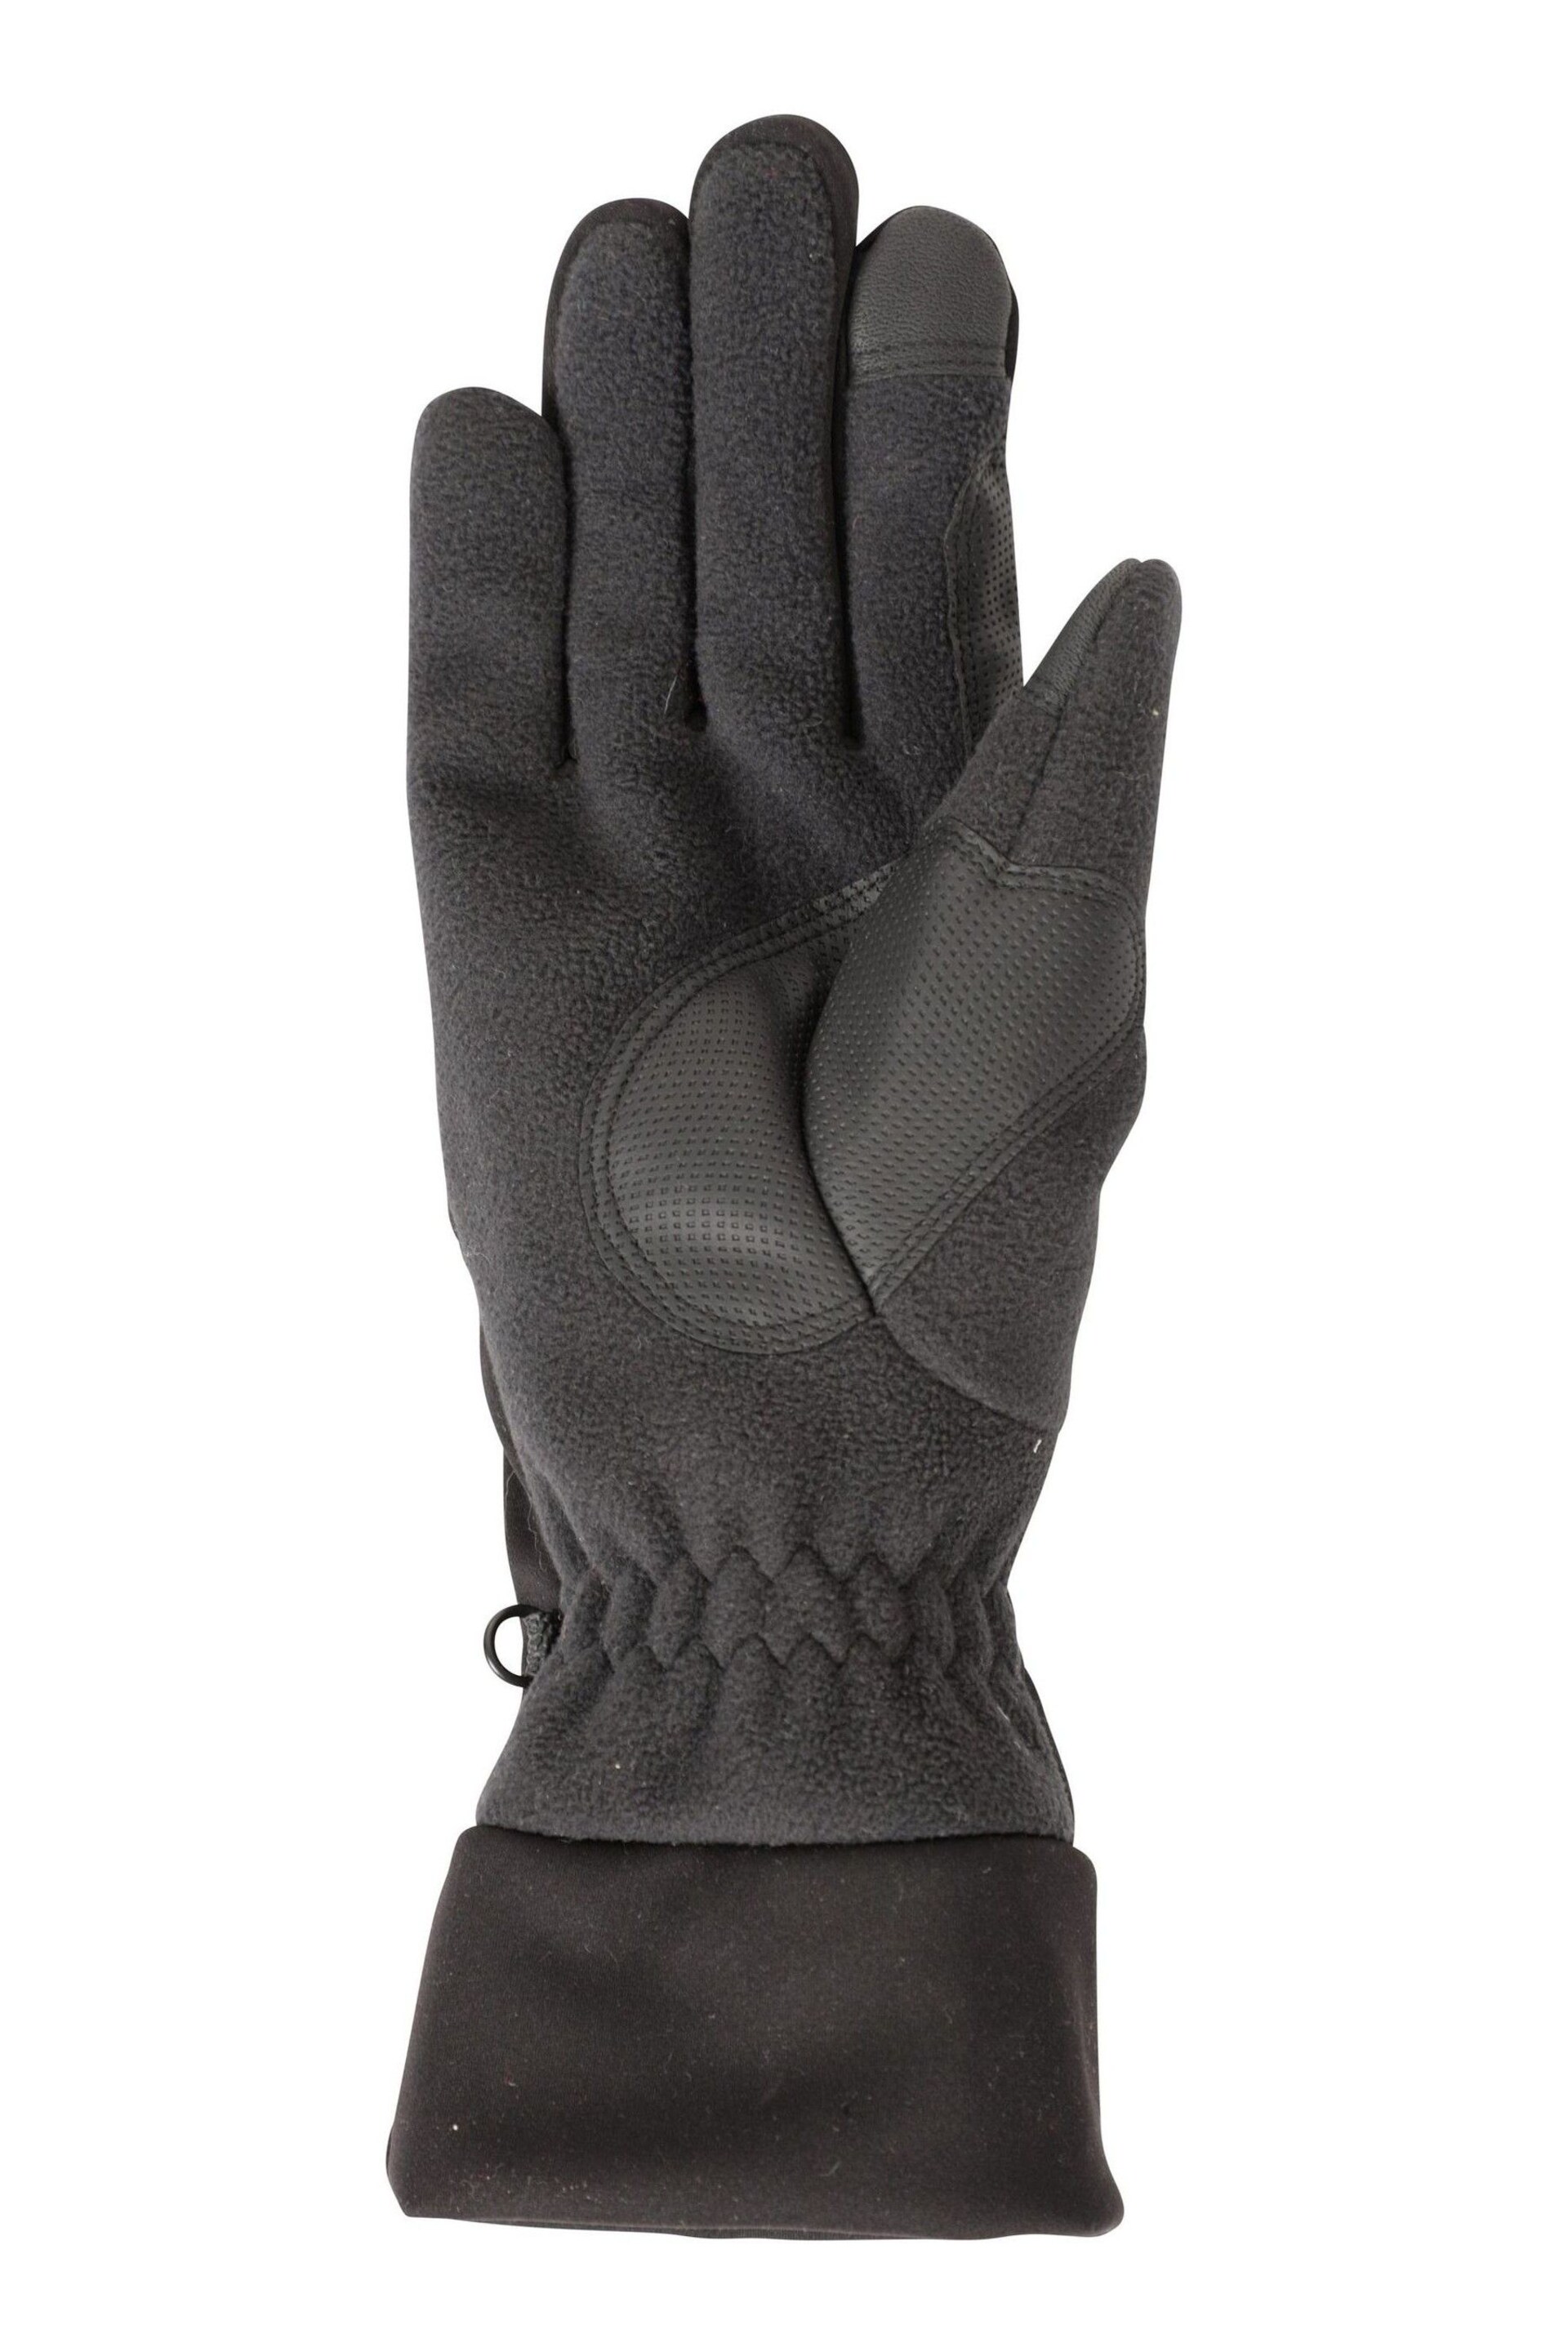 Mountain Warehouse Black Softshell Touchscreen Mens Gloves - Image 2 of 5